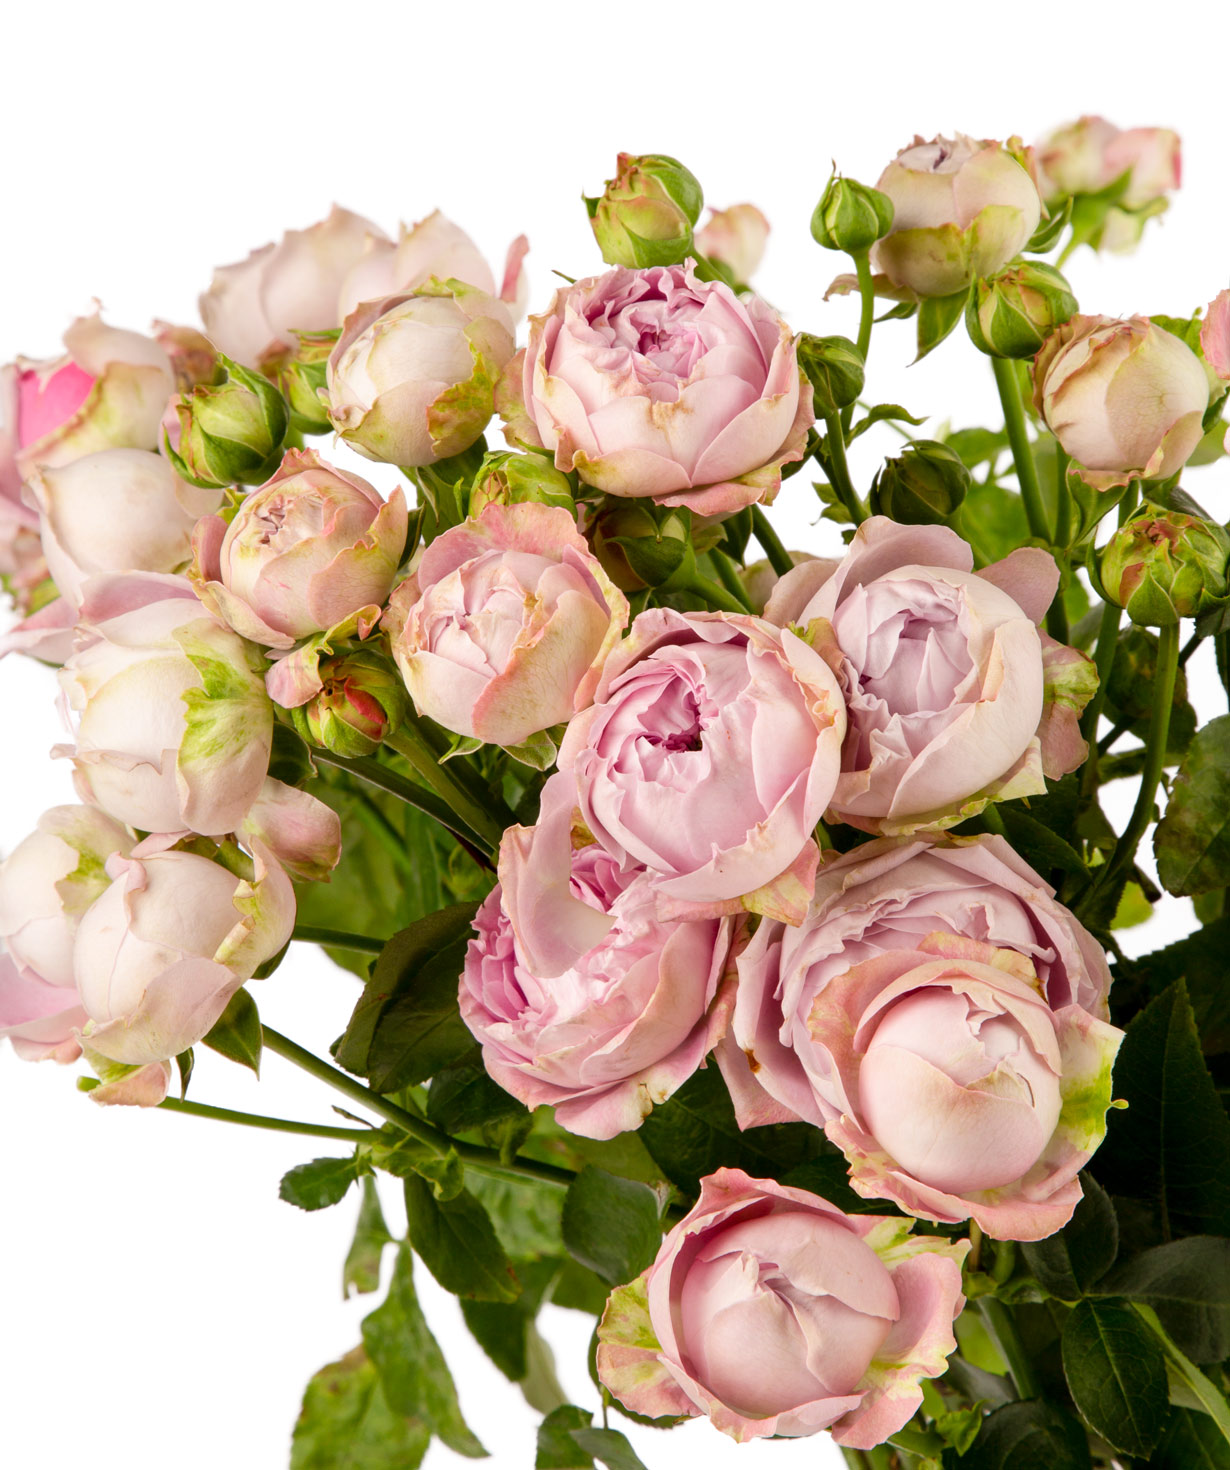 Bouquet `BLOSSOM BUBBLES` with peony rose